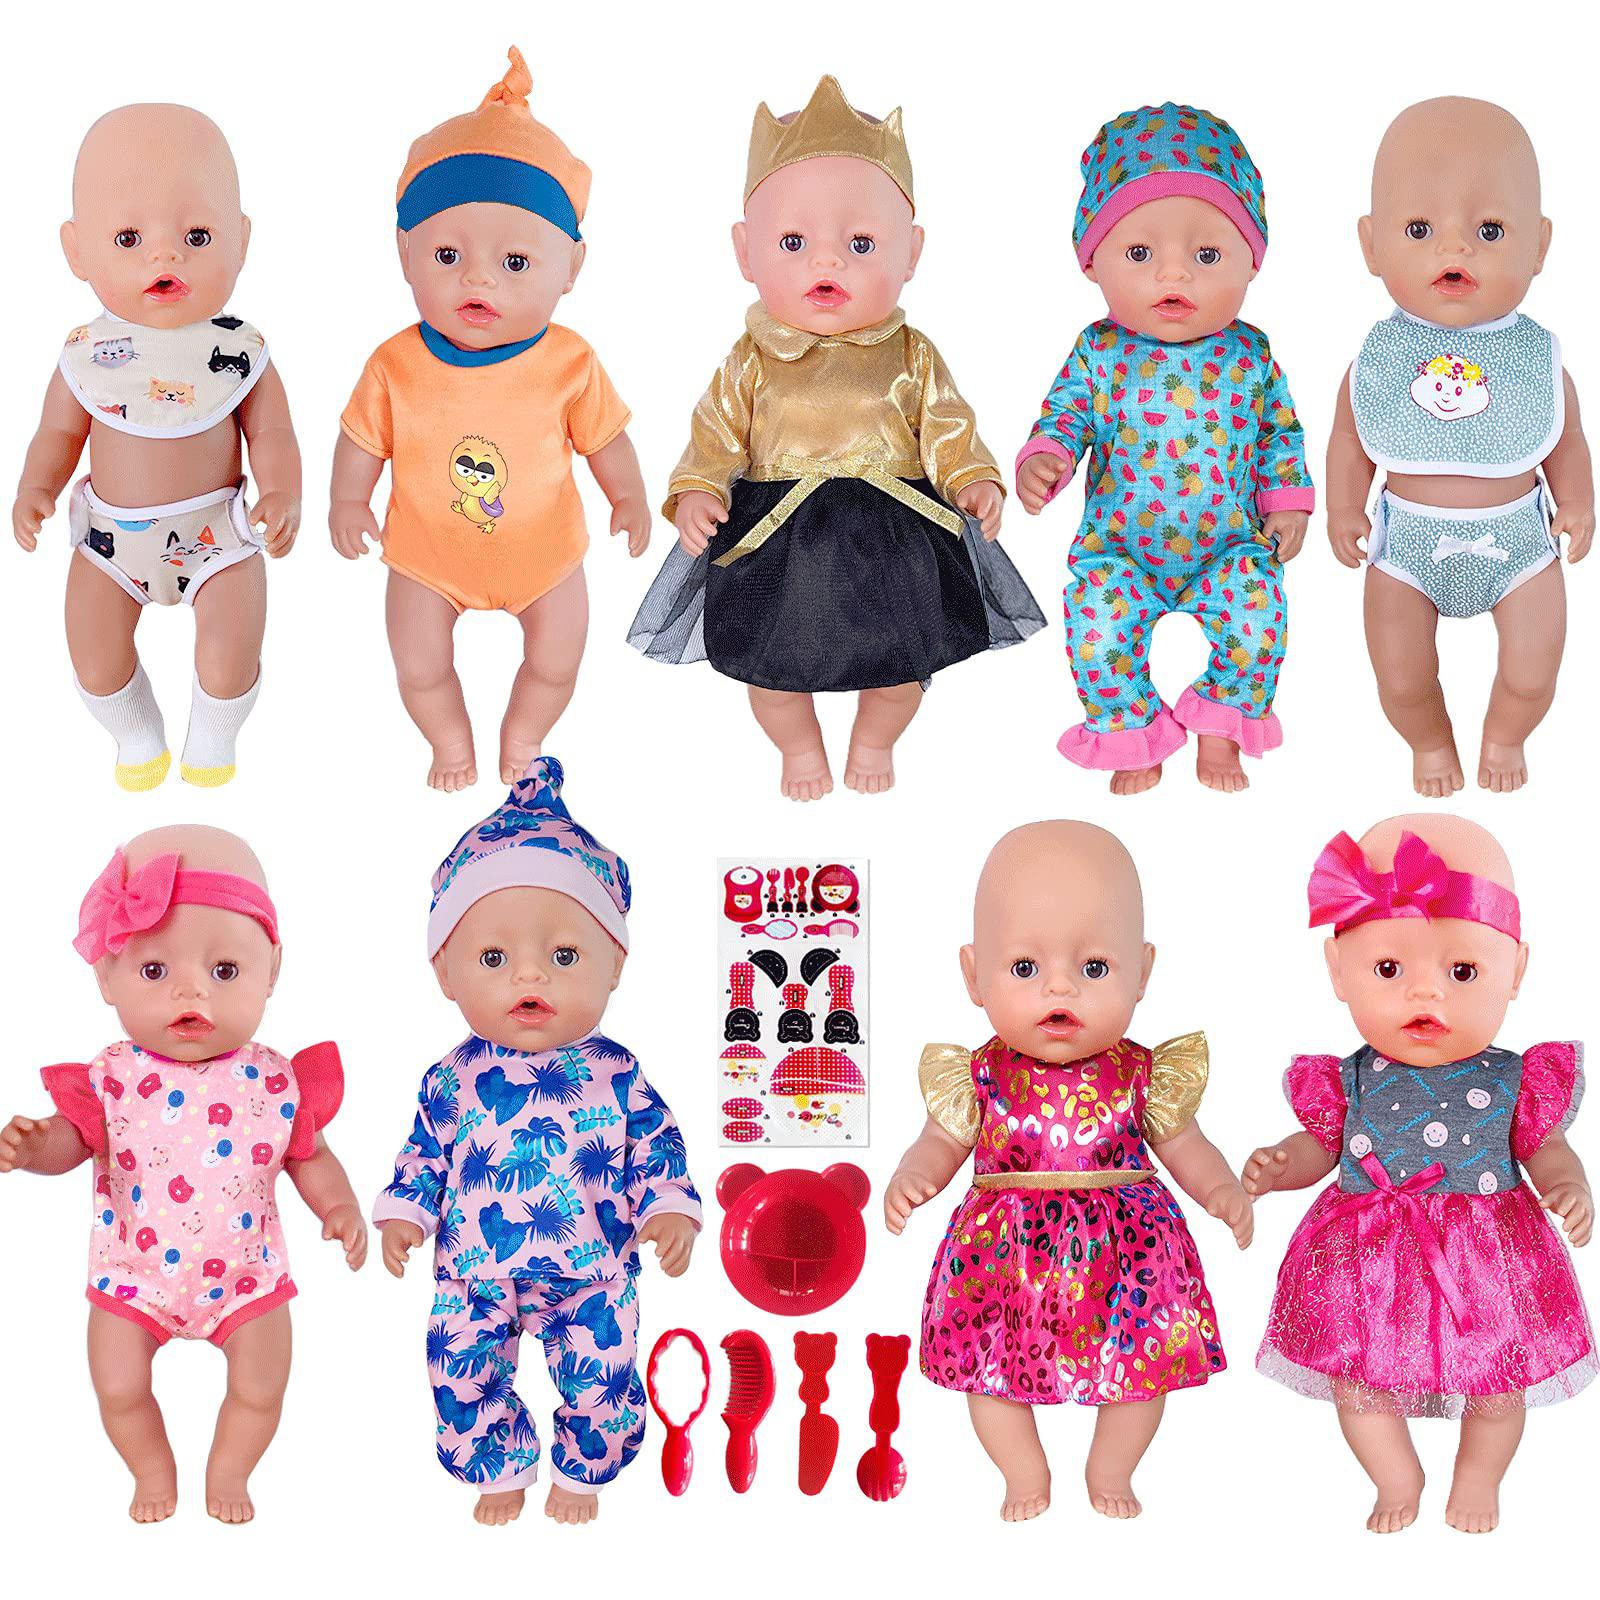 artst 9 sets 14-16-inch-baby-doll-clothes compatible with 43cm baby doll 15-inch-baby-doll american-18-inch-girl-doll christm